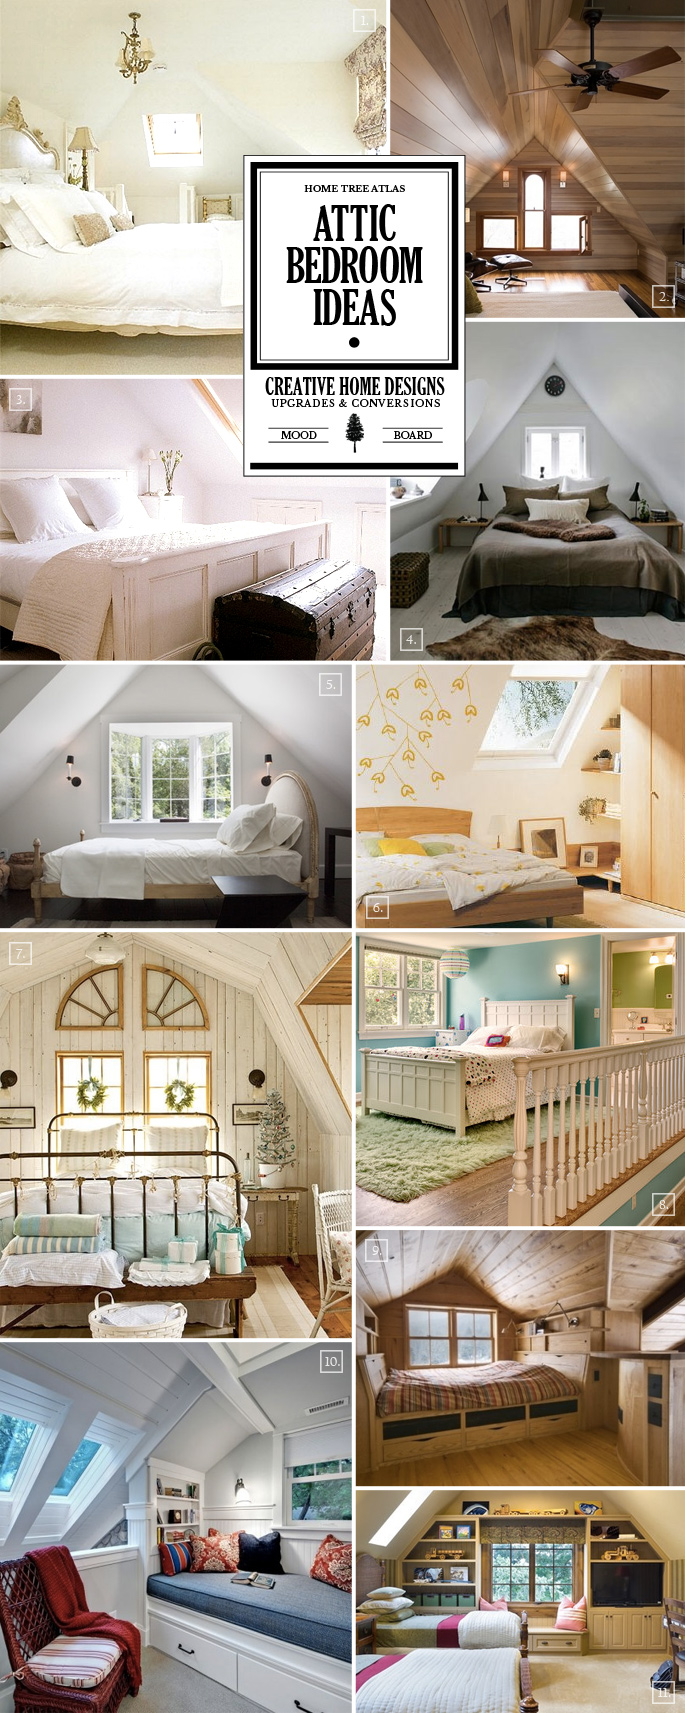 Turning an Attic Into A Bedroom: Ideas and Designs